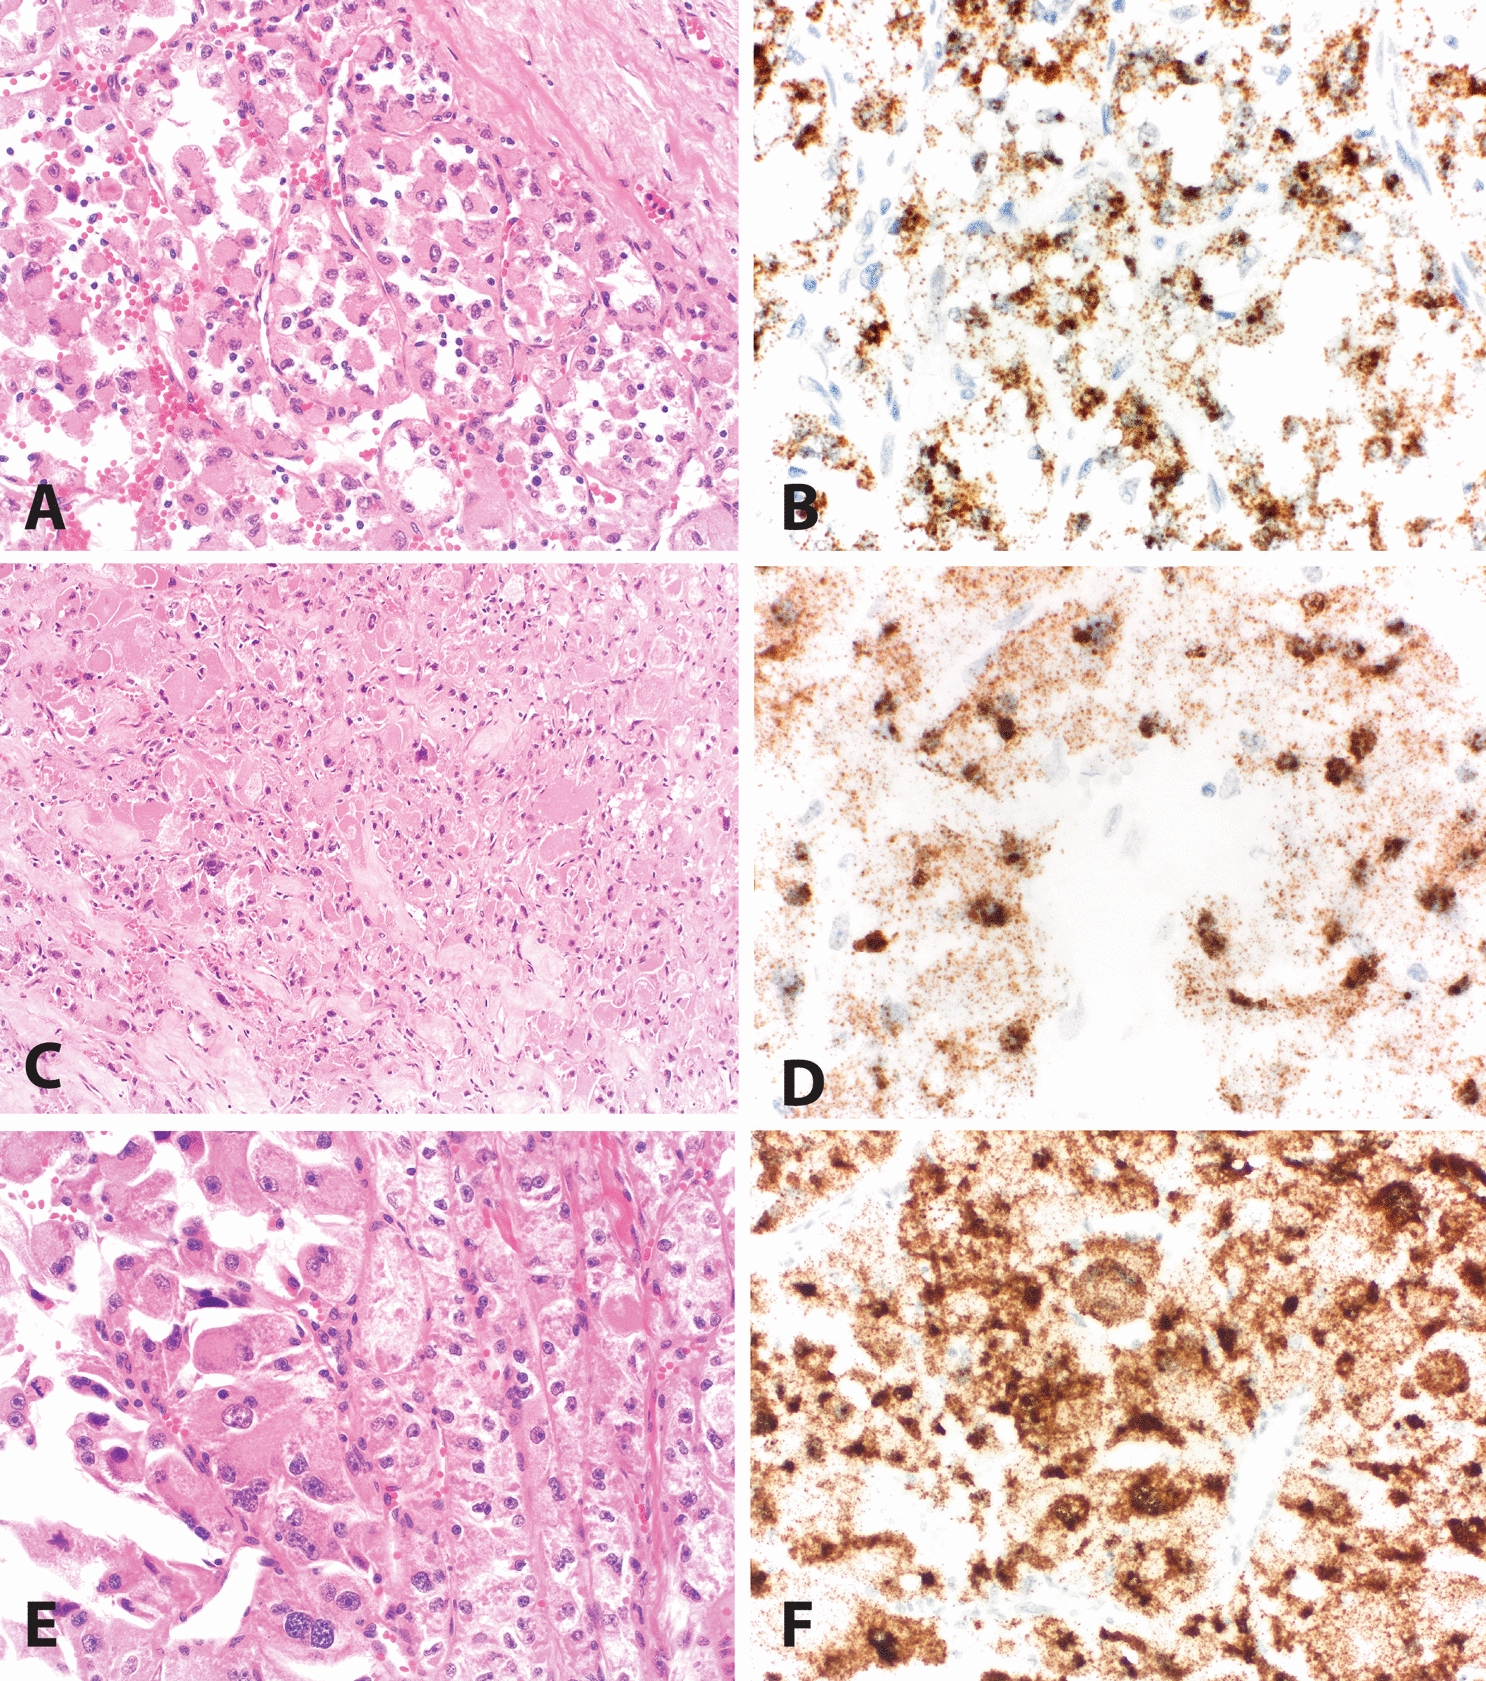 Evaluation of TRIM63 RNA in situ hybridization (RNA-ISH) as a potential biomarker for alveolar soft-part sarcoma (ASPS)